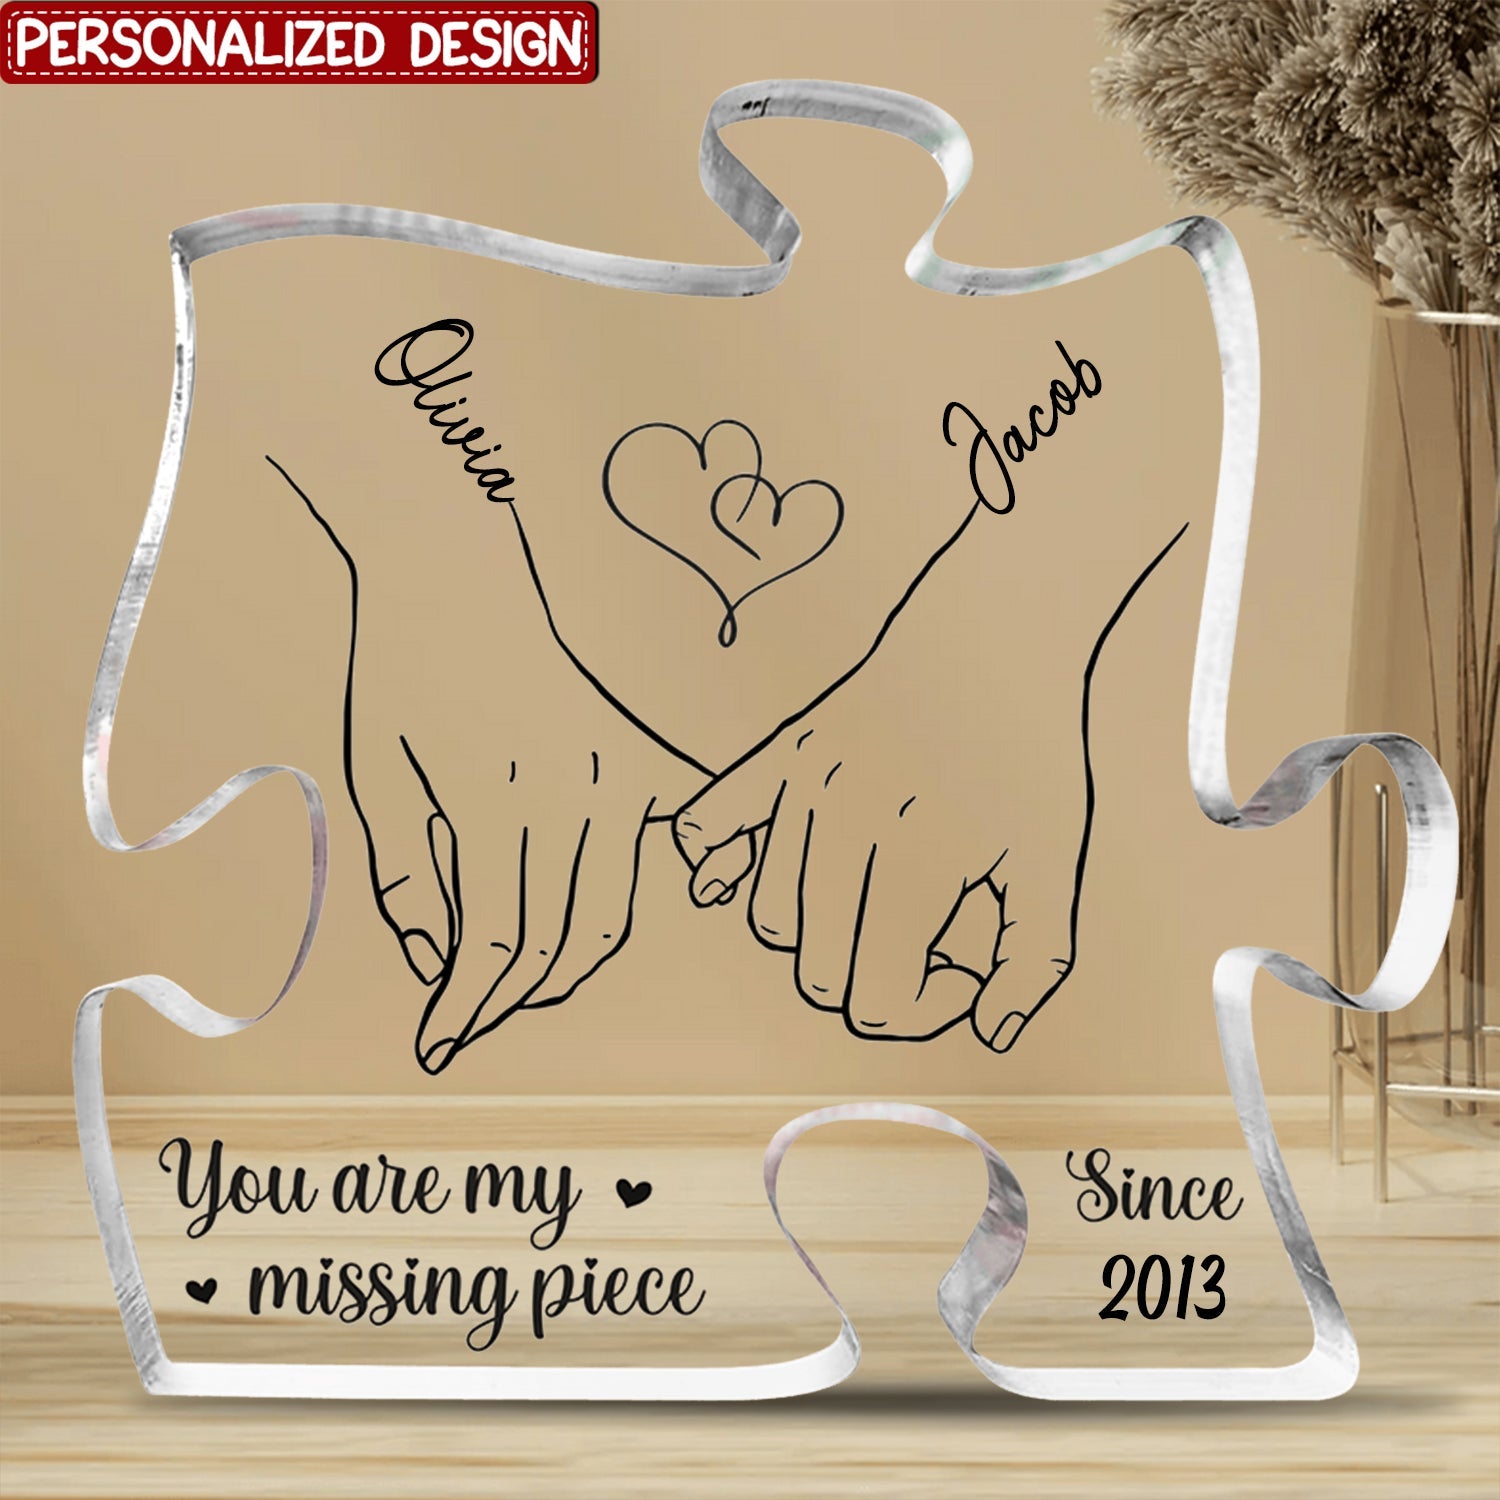 You are my missing piece- Couple Personalized Puzzle Shaped Acrylic Plaque